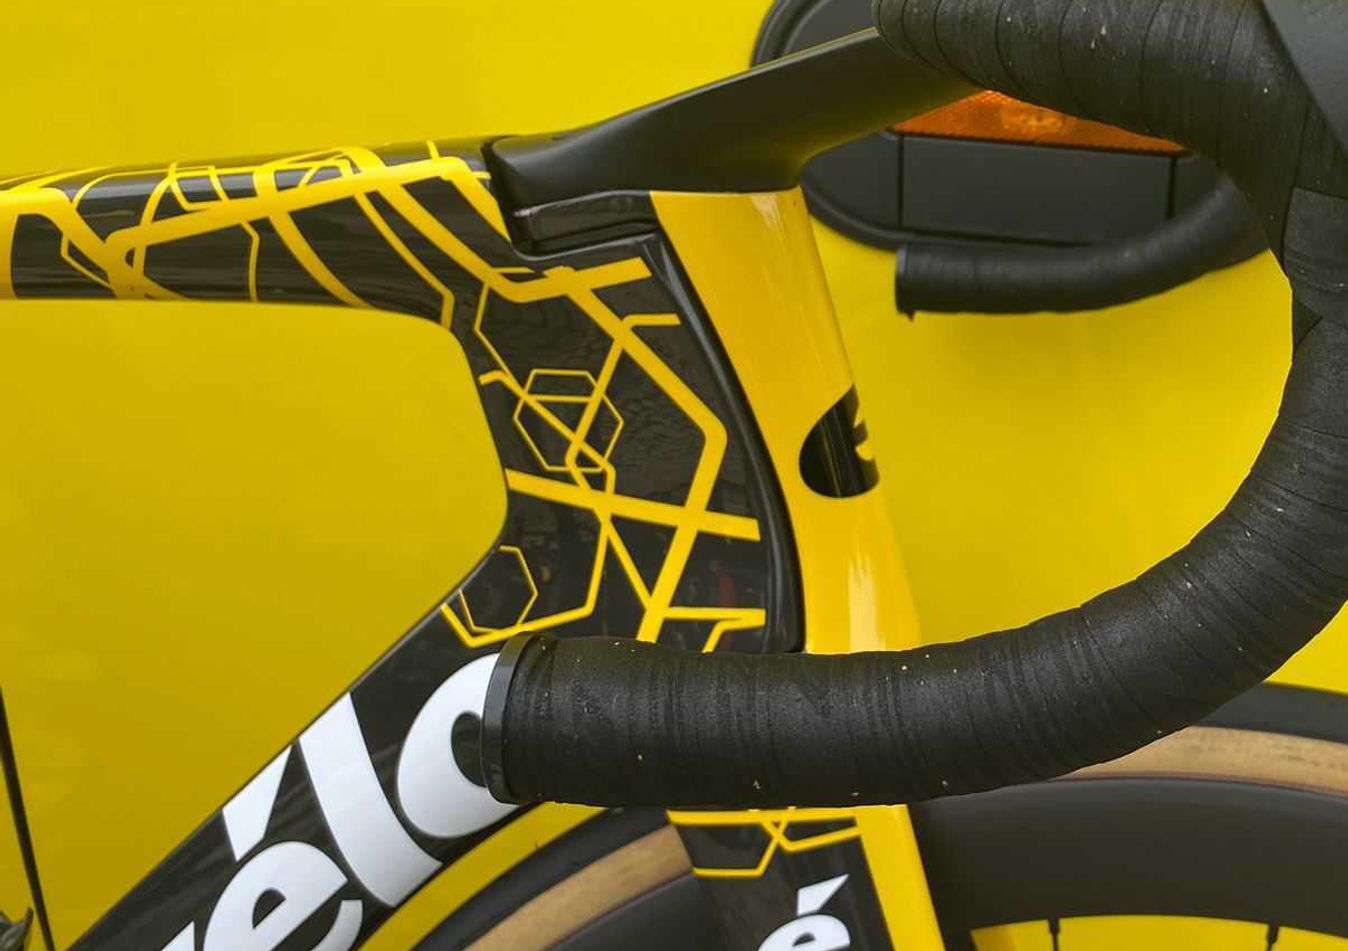 The deep head tube is becoming increasingly adopted for its aero gains